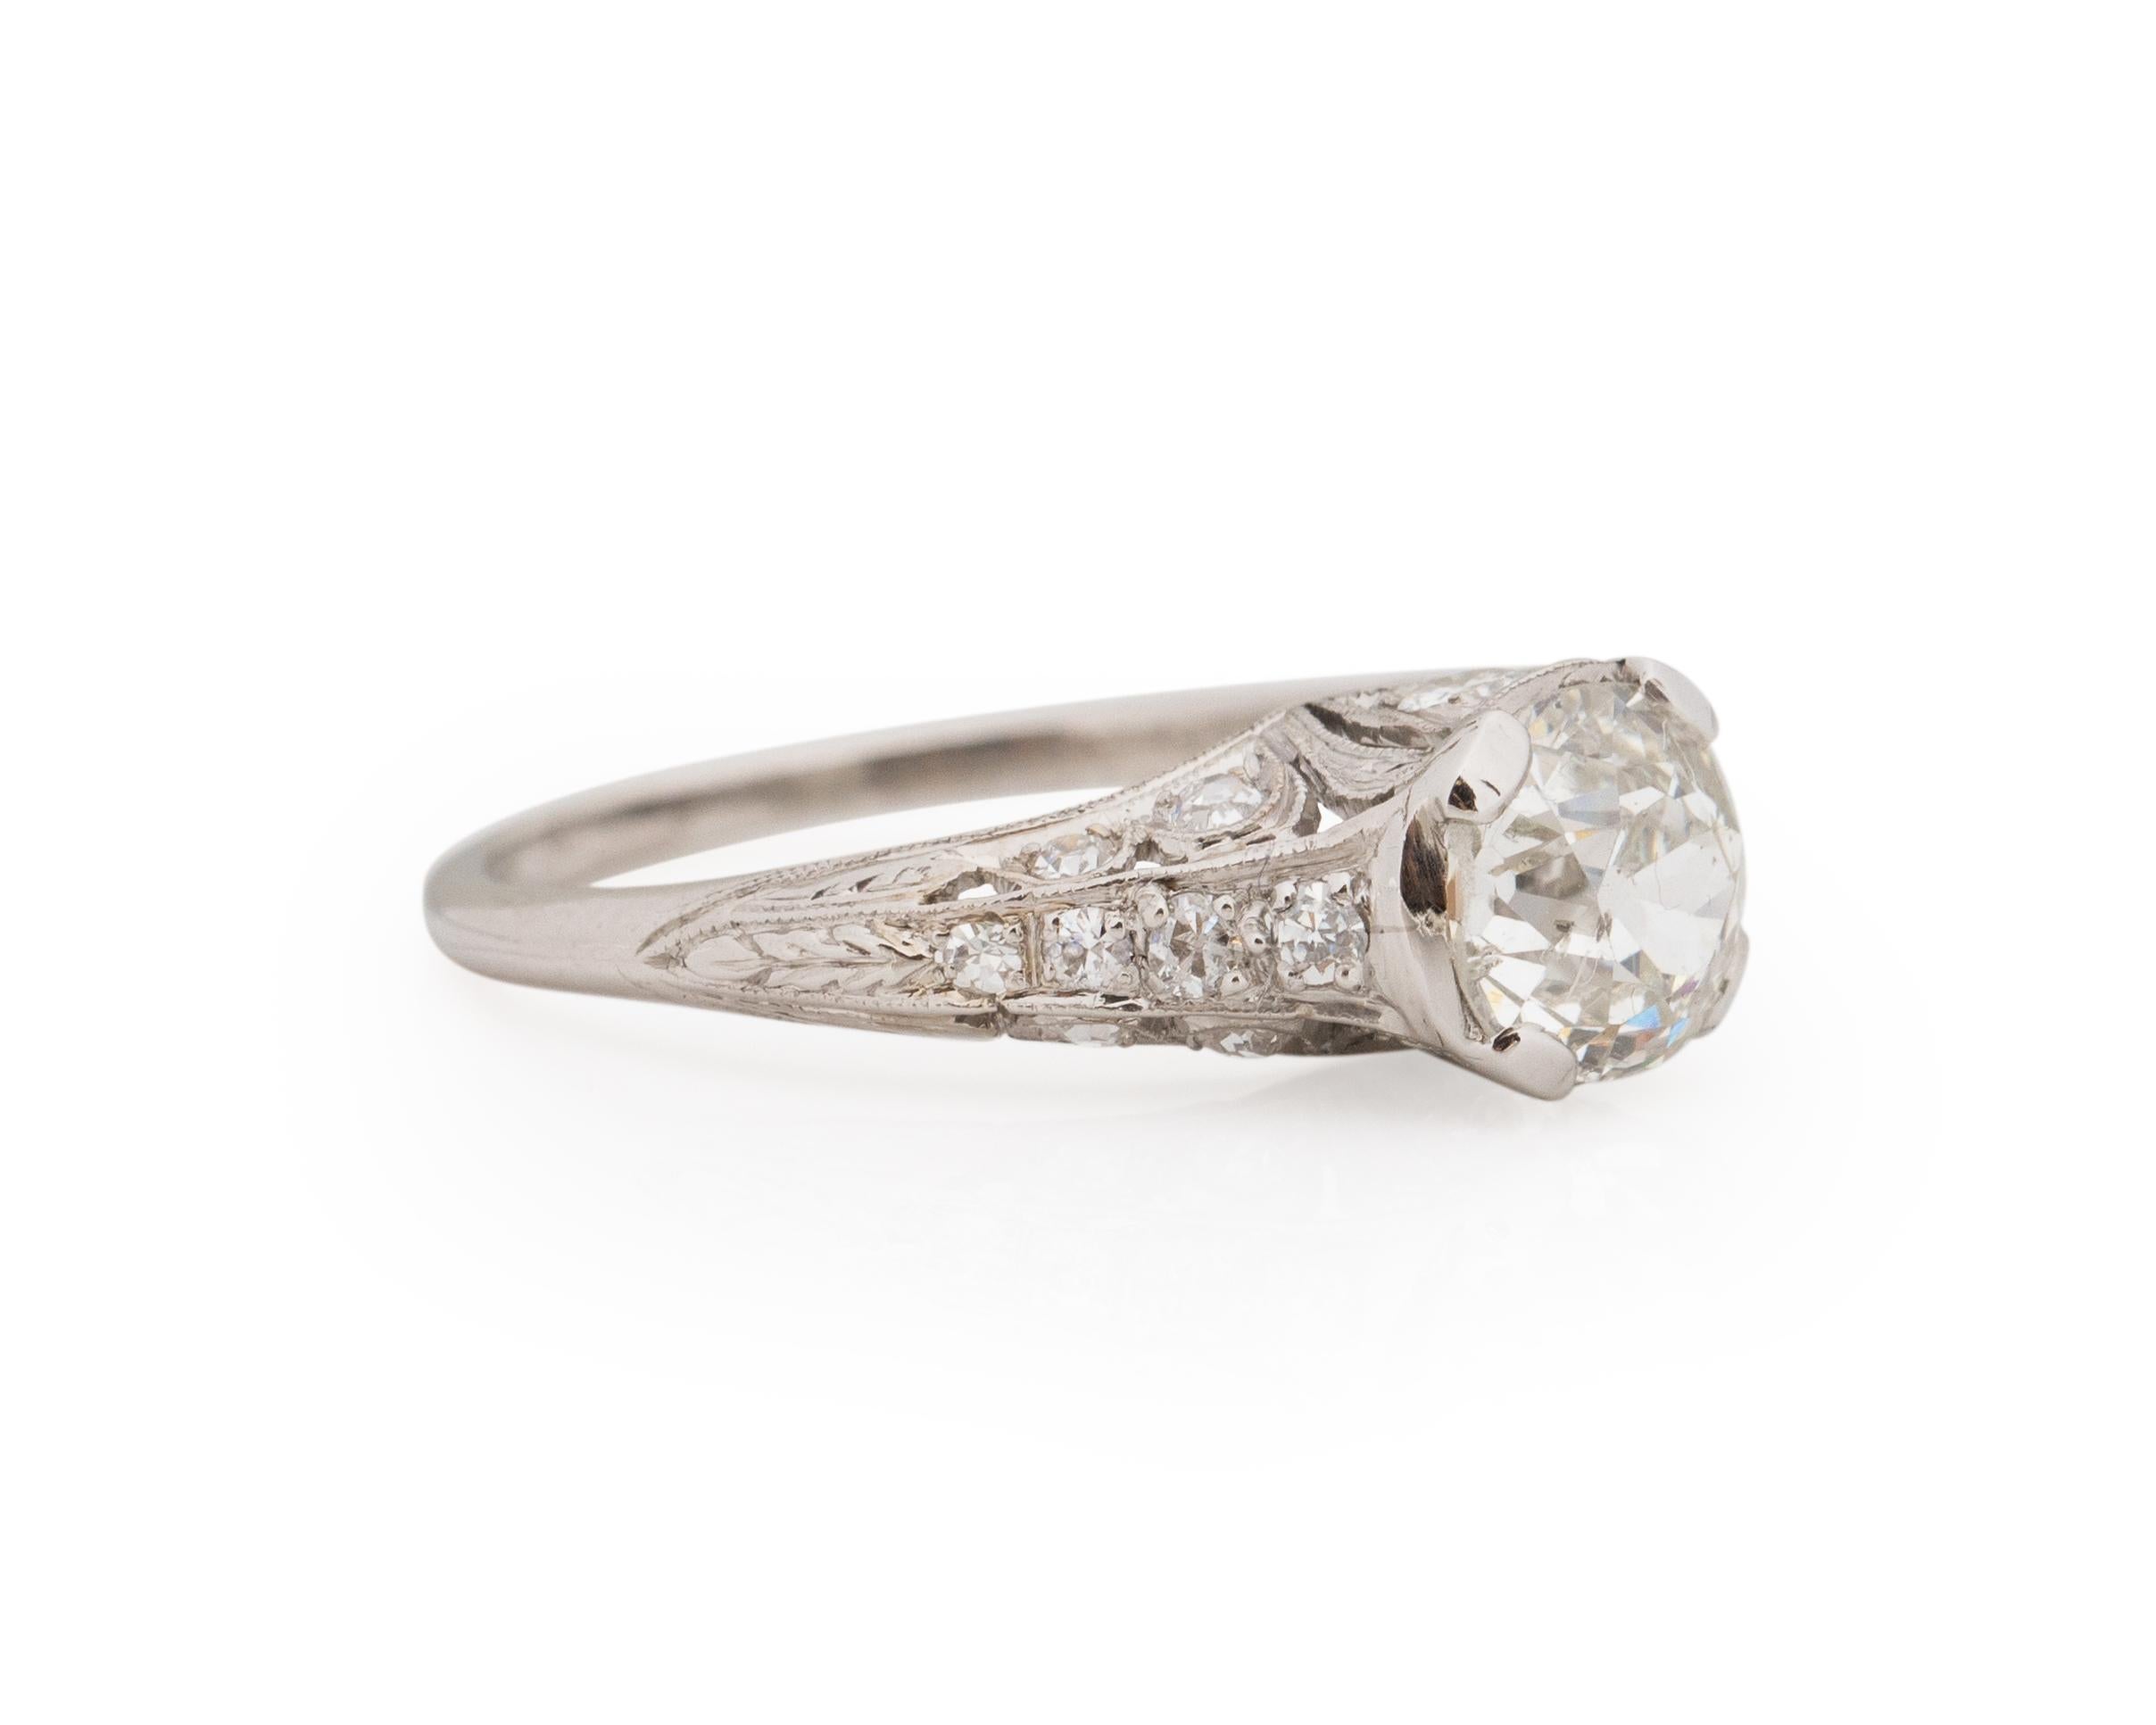 Ring Size: 5.25
Metal Type: Platinum [Hallmarked, and Tested]
Weight: 3.2 grams

Center Diamond Details:
GIA REPORT #: 2225339417
Weight: 1.20ct
Cut: Old Mine Brilliant
Color: J
Clarity: SI2
Measurements: 6.50mm x 6.29mm x 4.03mm

Side Stone